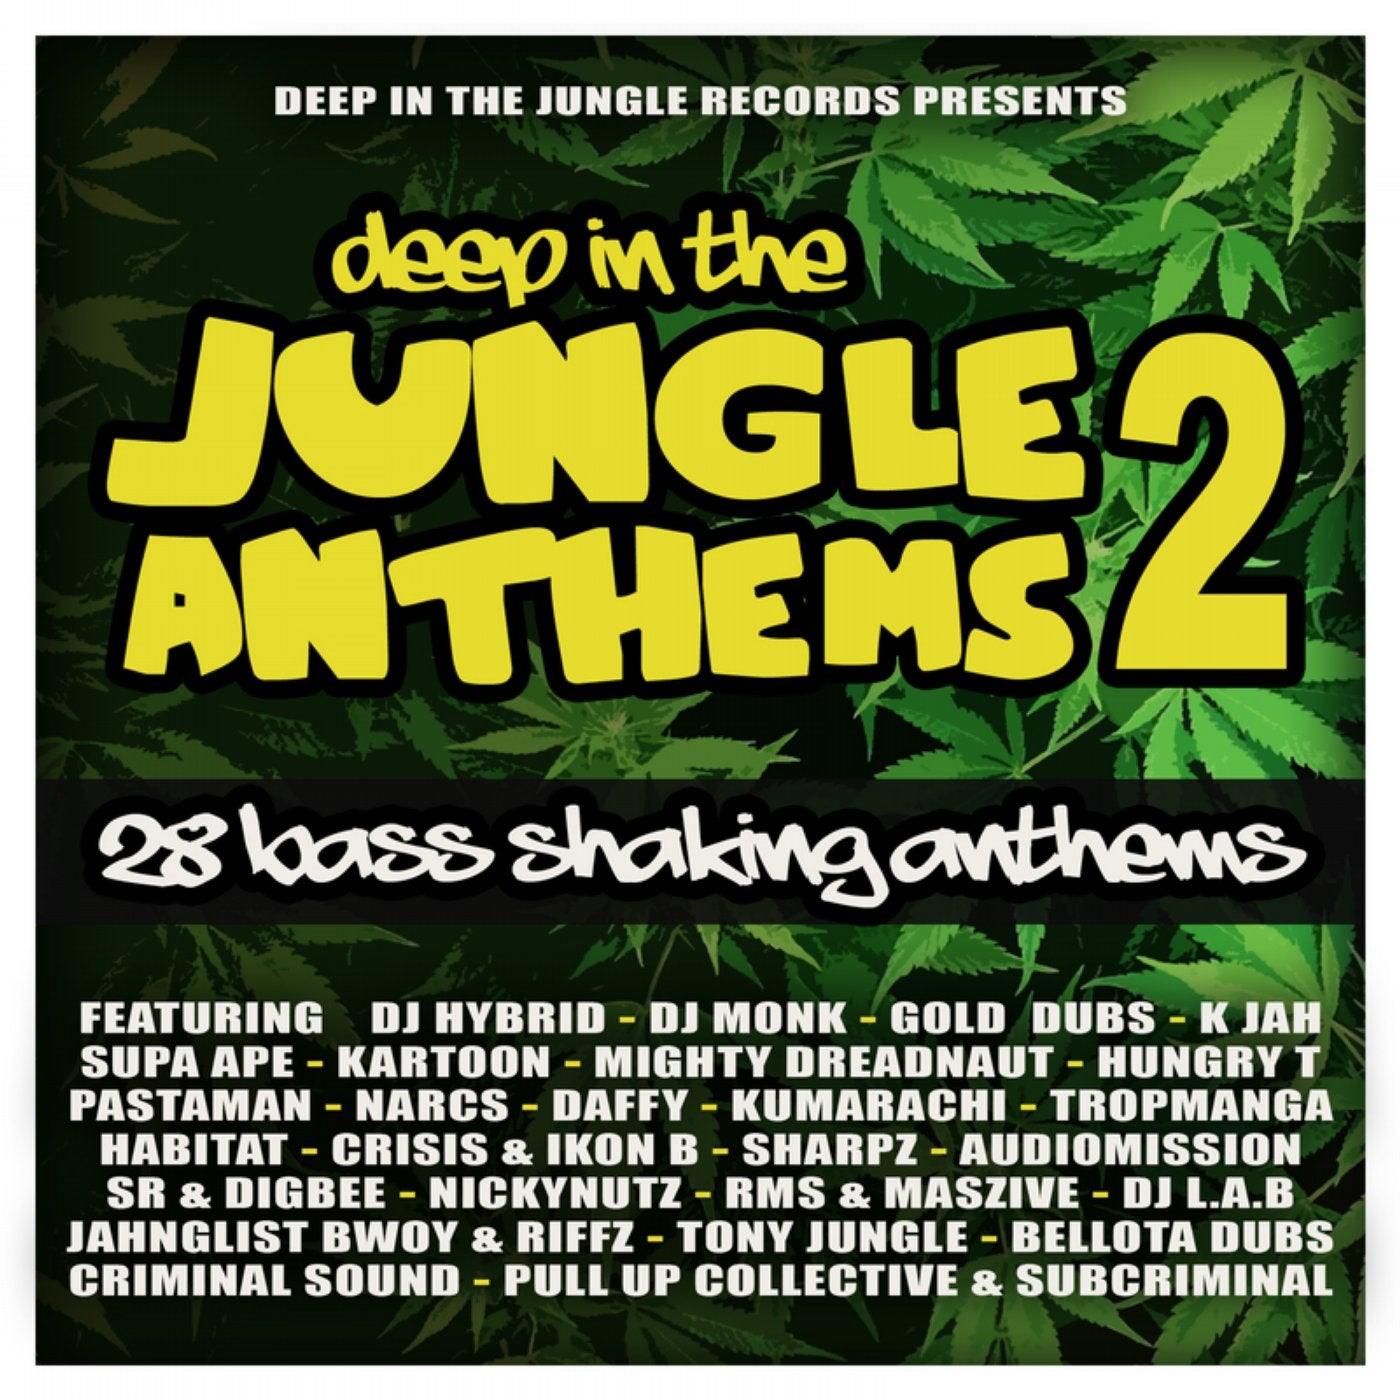 Deep In The Jungle Anthems 2